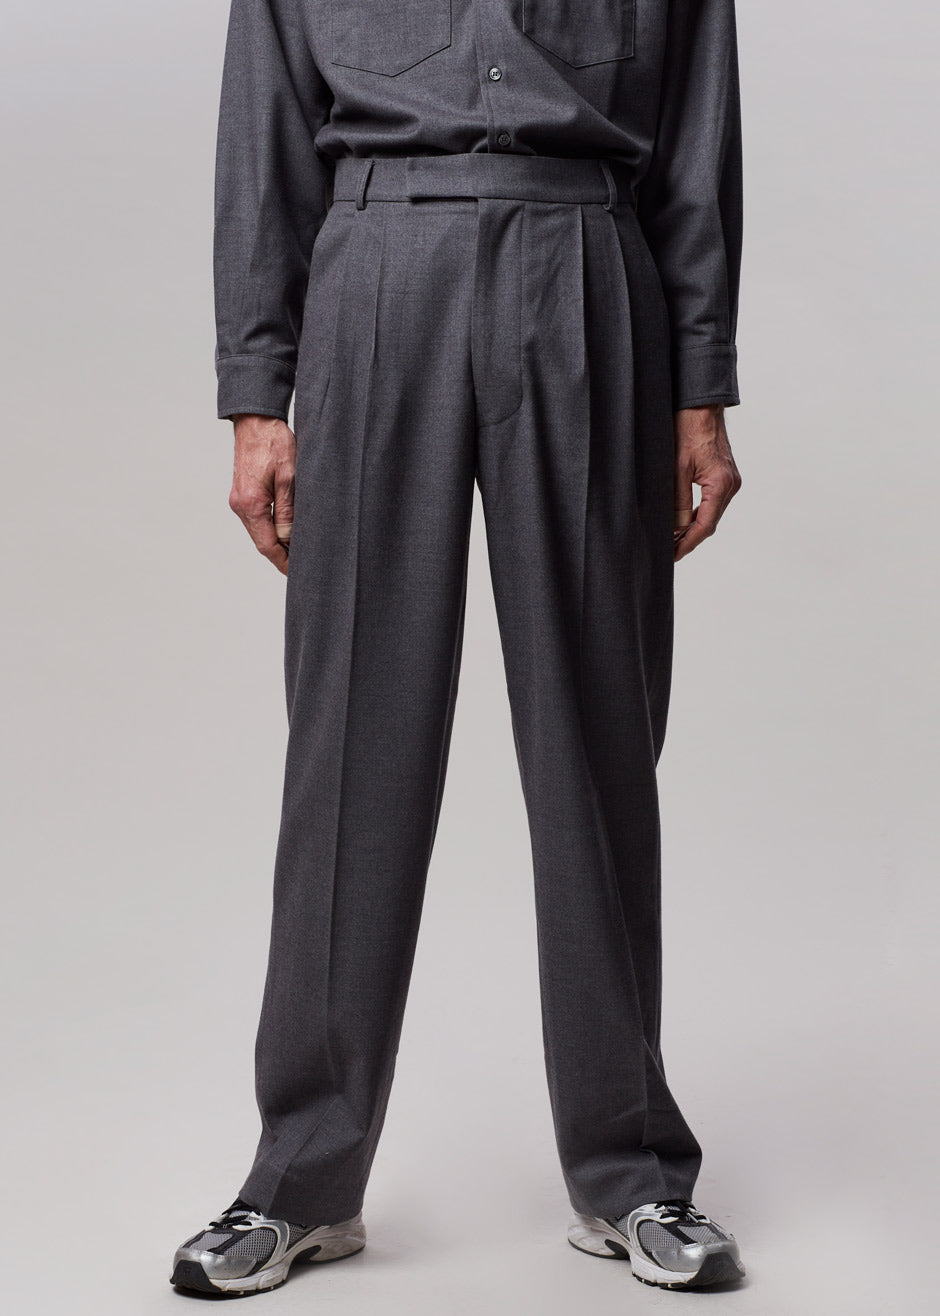 Heith Flanelle Suit Pants - Charcoal